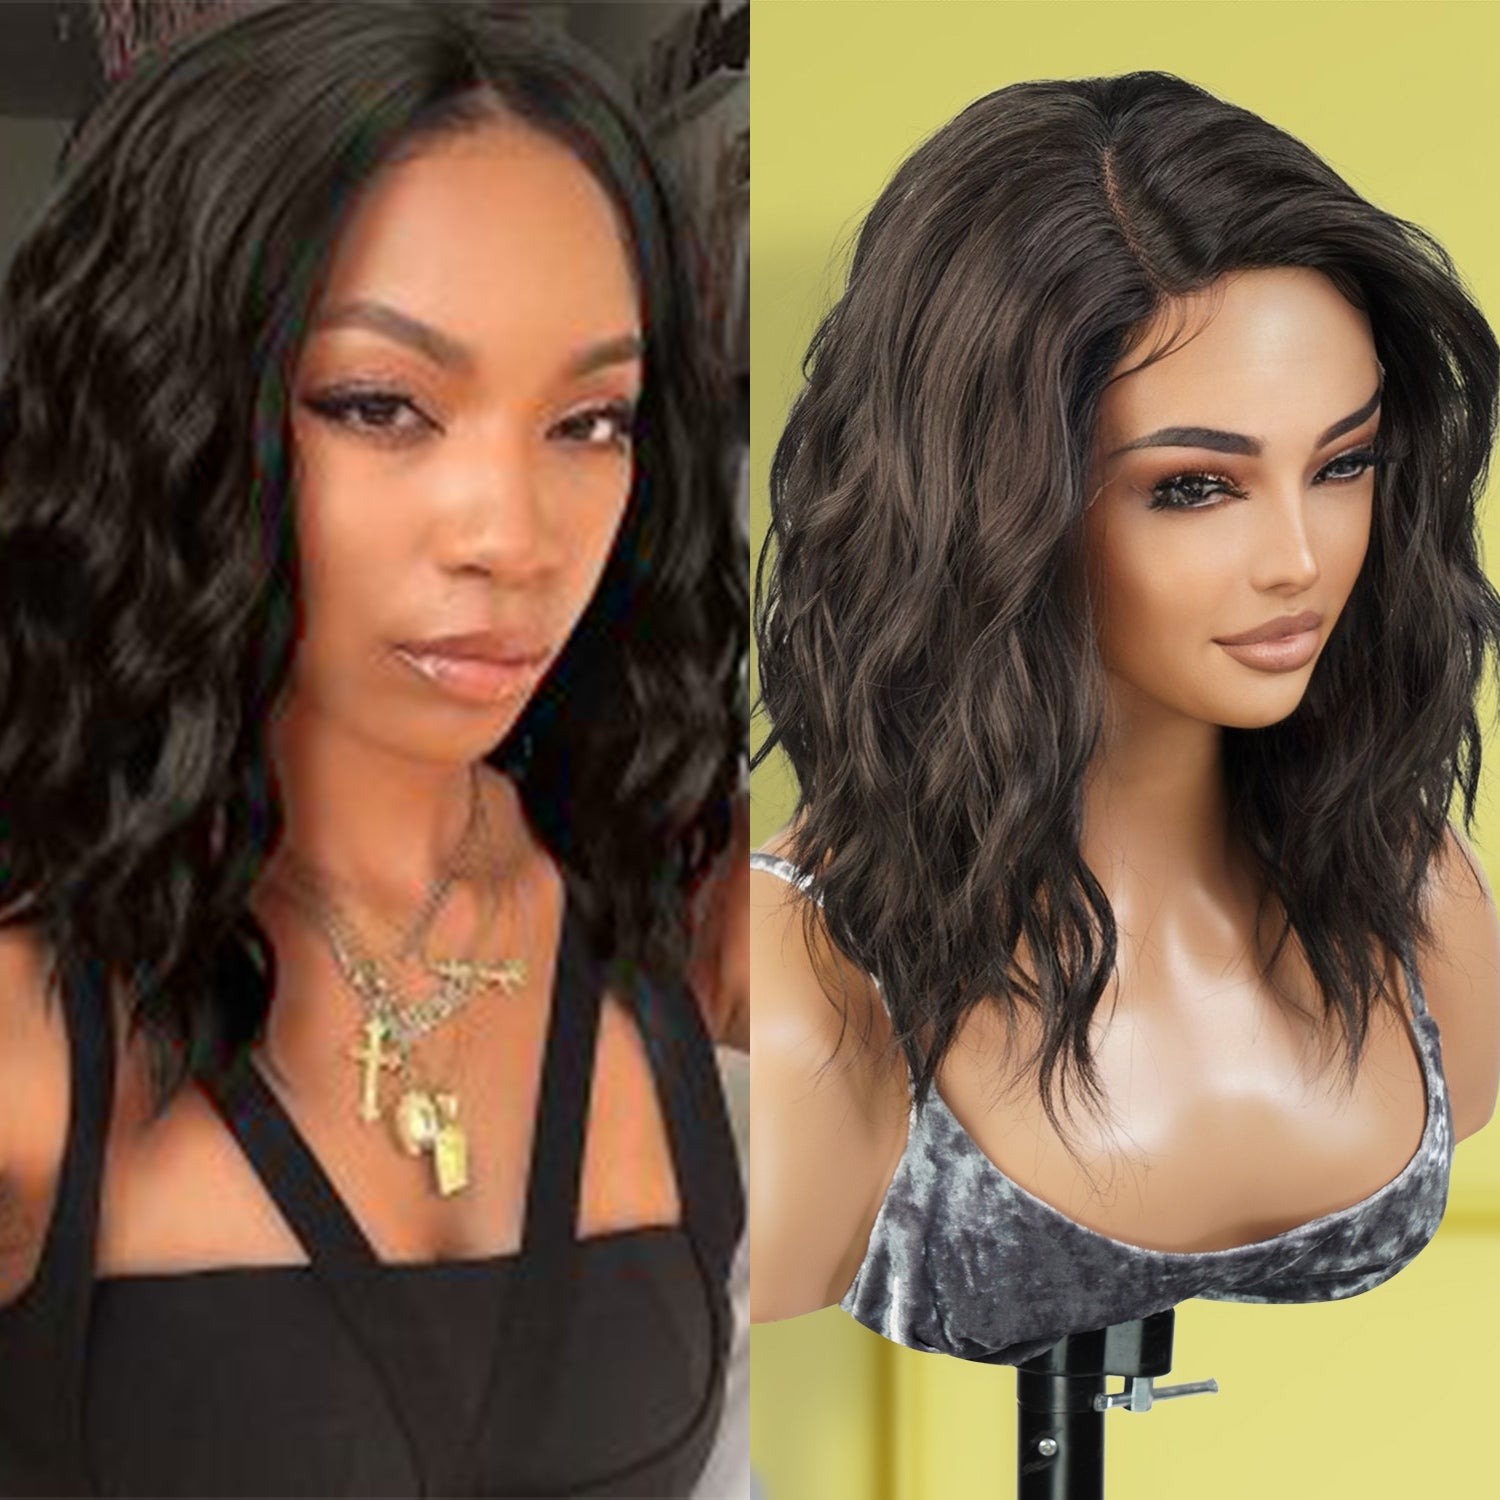 Elevate your look with our stunning loose wave bob wig! Made with high-quality heat-resistant fibers, it features a side deep part lace front design for a natural-looking hairline. The curly wavy style adds volume, while the 14-inch length and bob cut offer a trendy touch. Perfect for black women, this versatile wig is a must-have. Shop now for ultimate style and versatility!